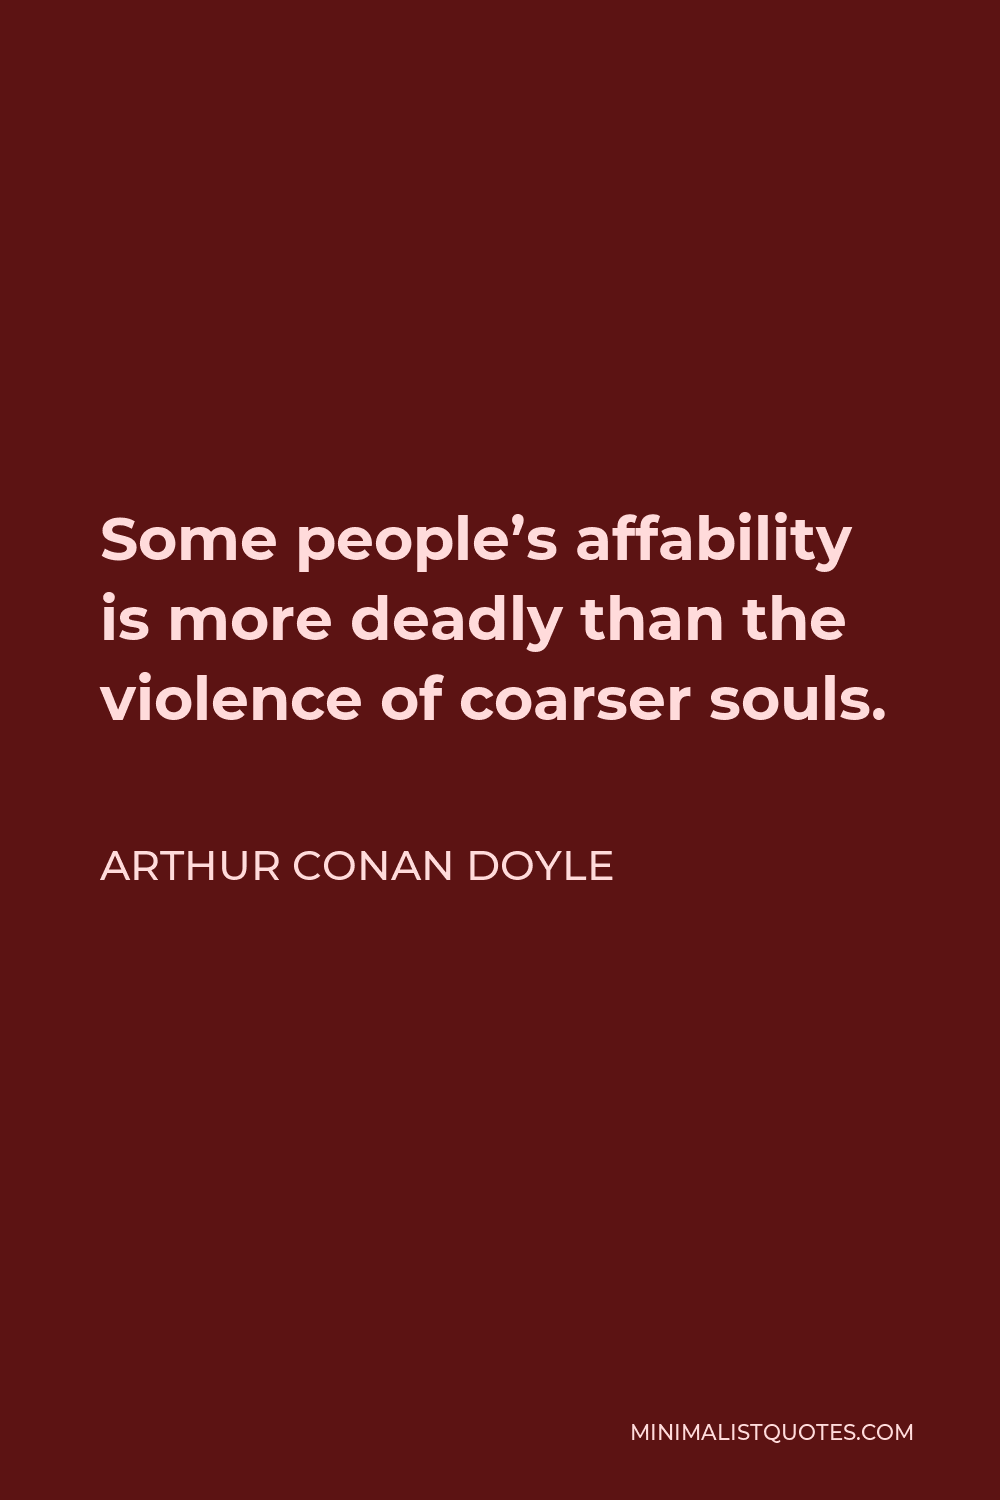 Arthur Conan Doyle Quote - Some people’s affability is more deadly than the violence of coarser souls.